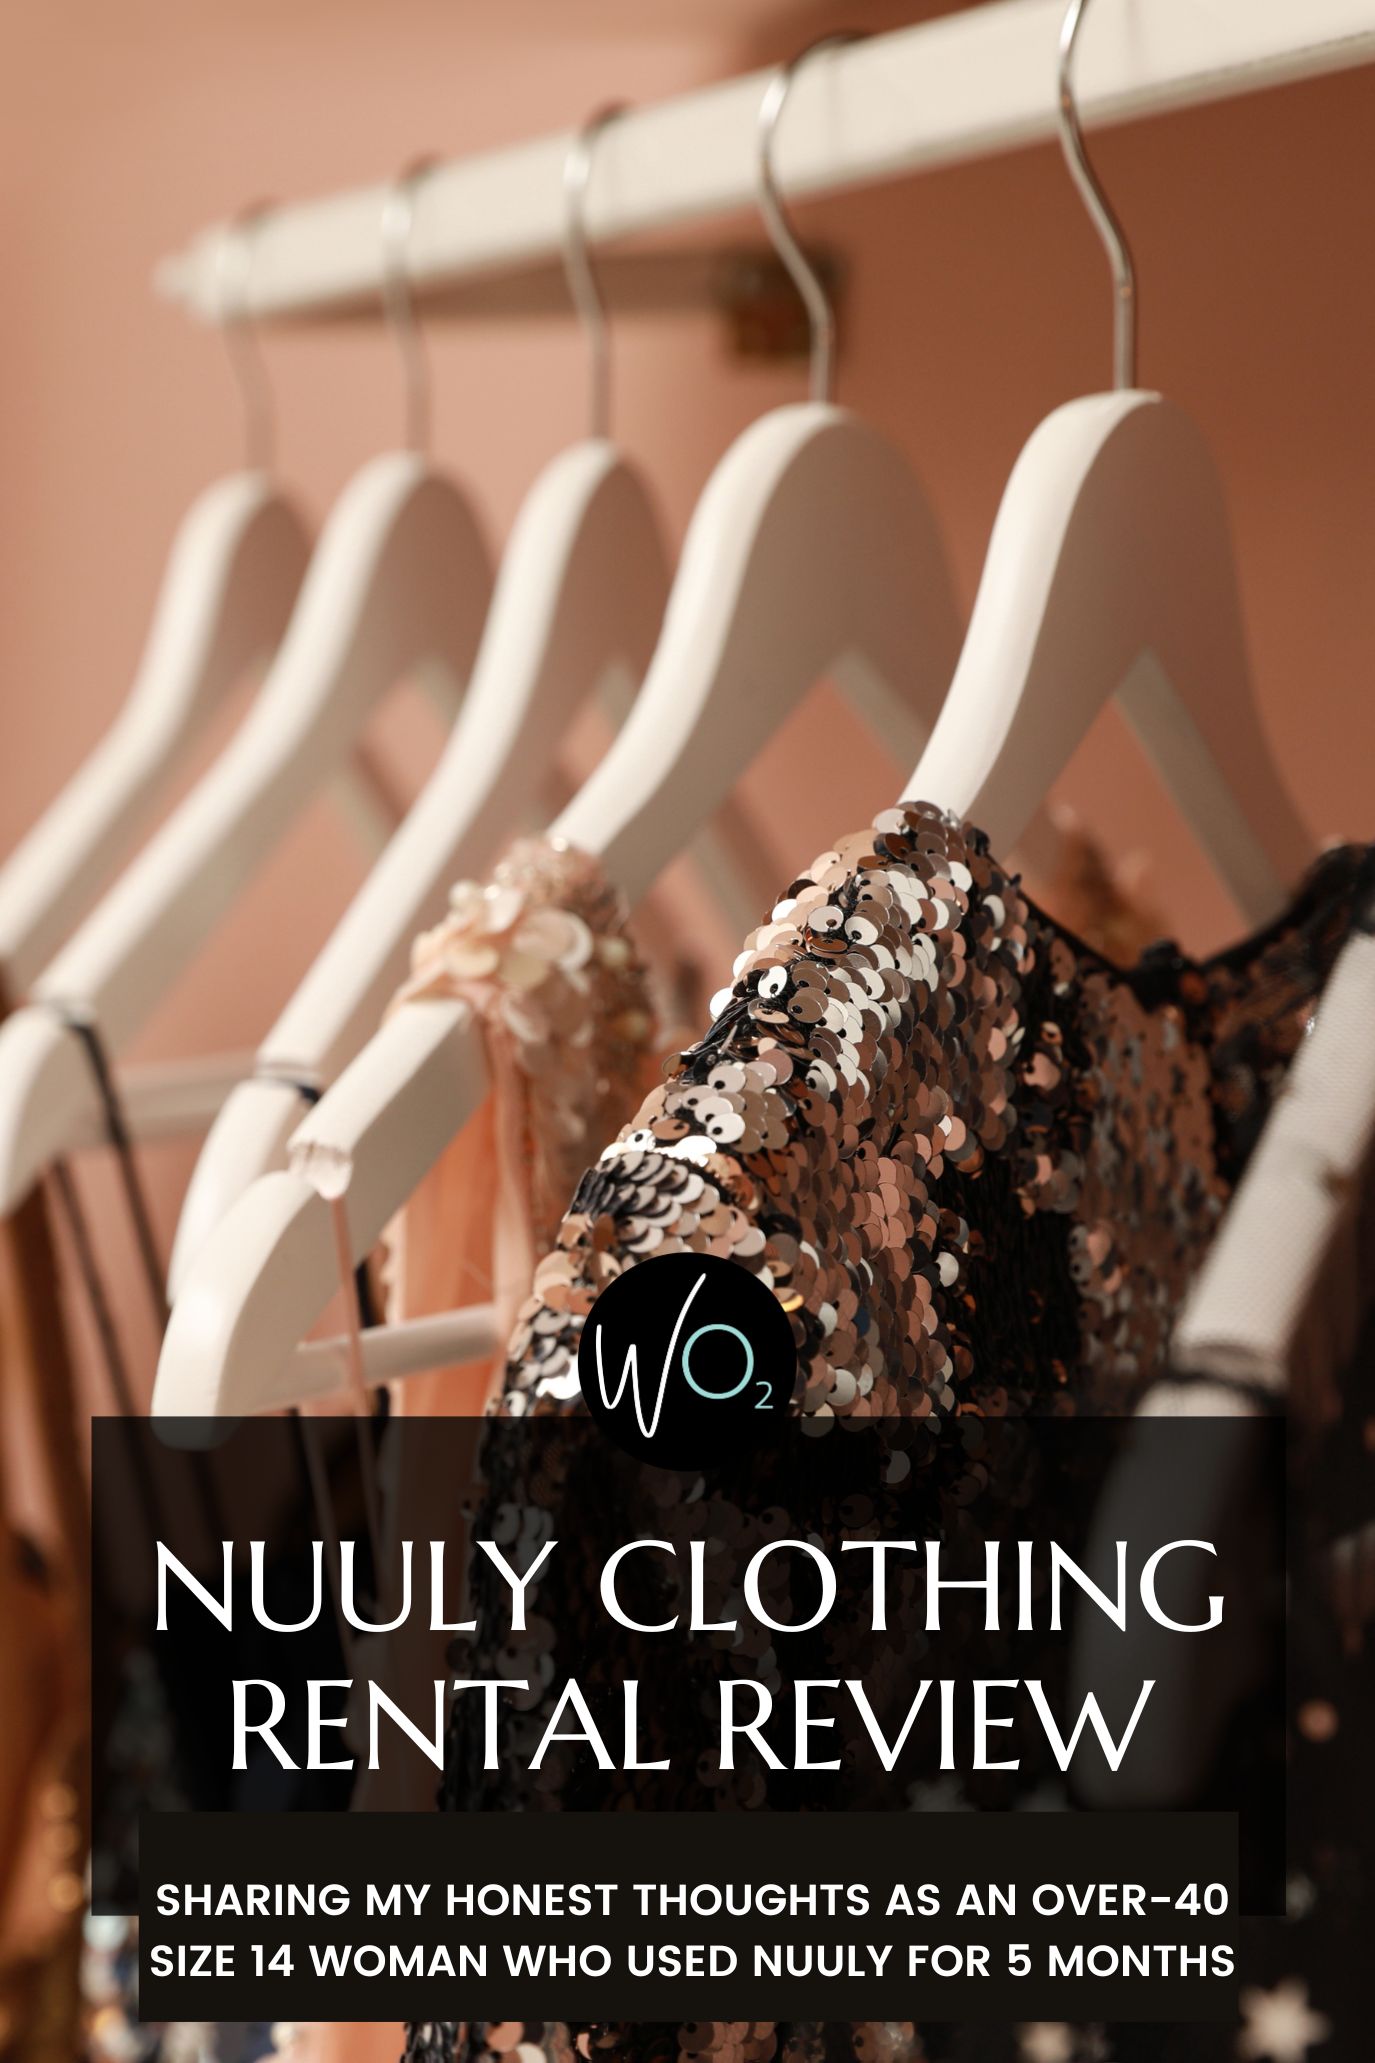 Nuuly Clothing Rental Review by an Over-4o Midsize Woman